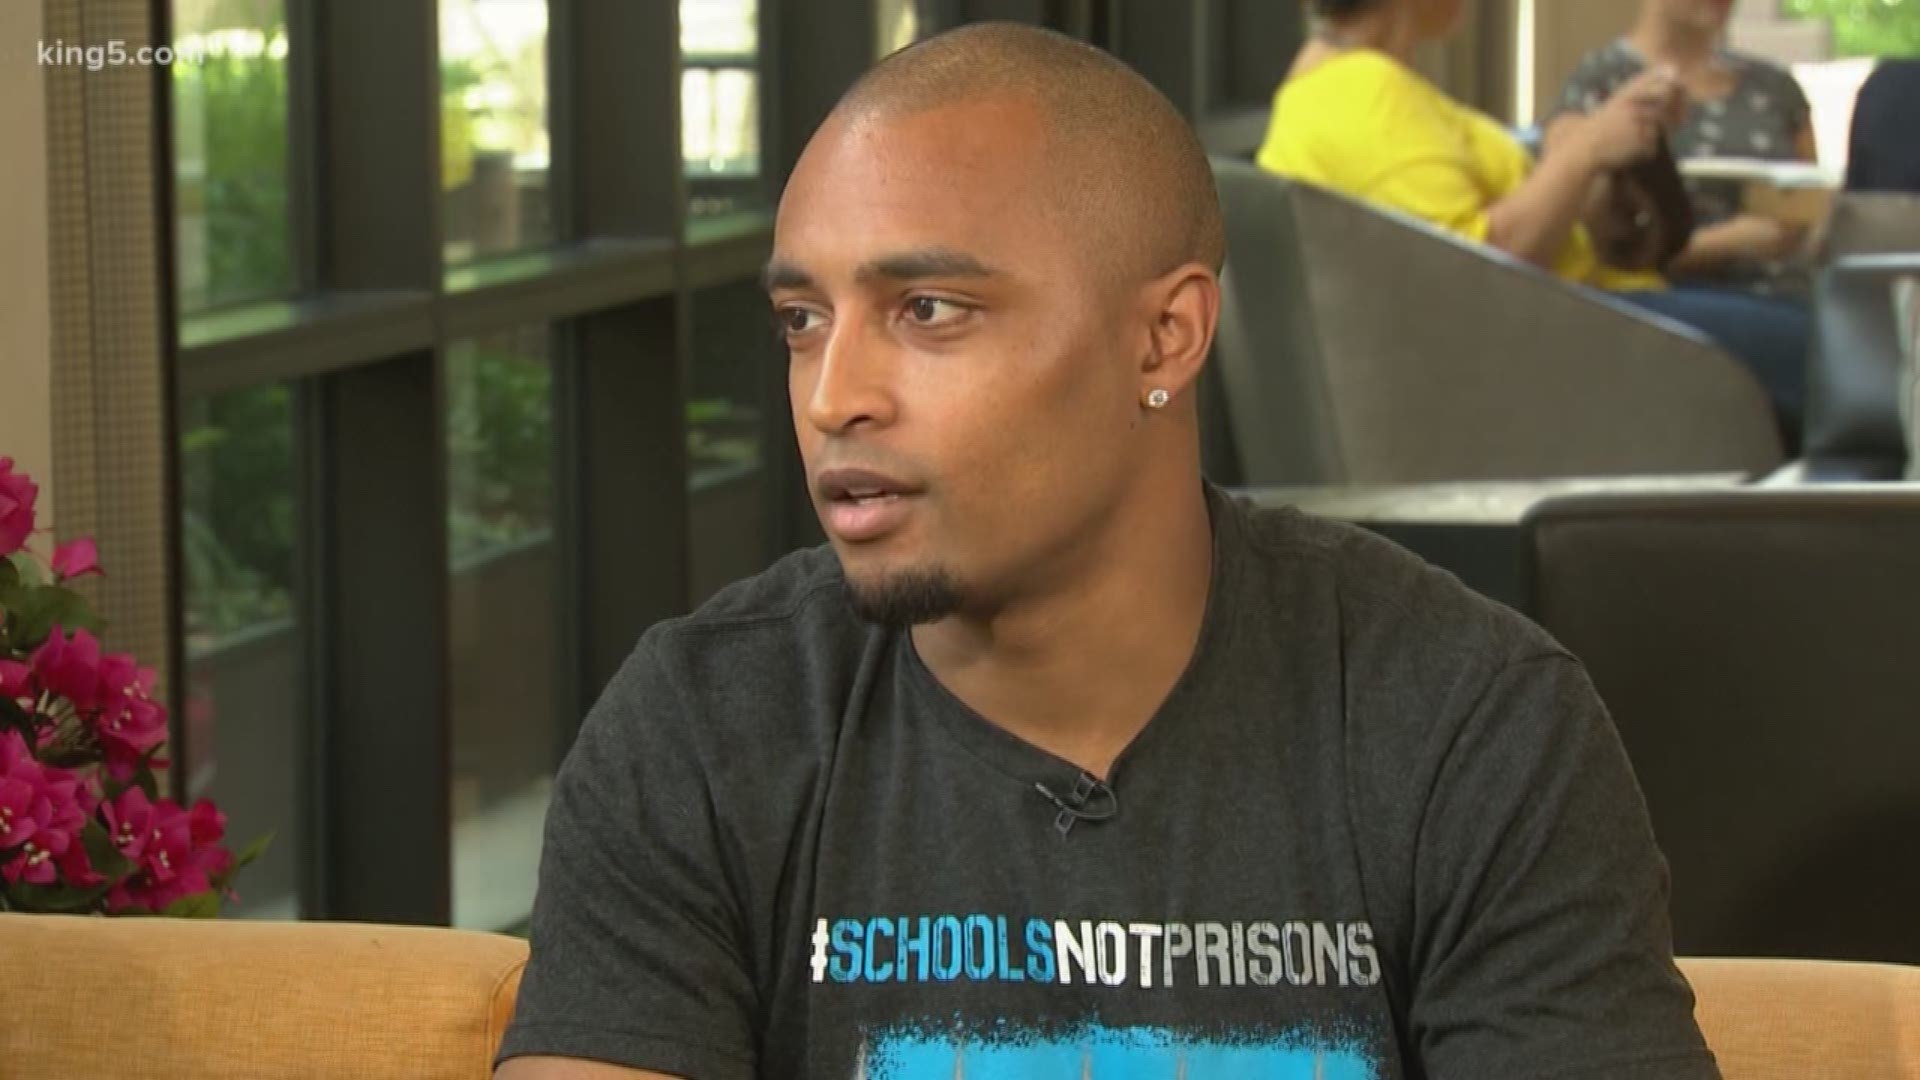 The Family First Community Center will be a place for kids to play sports or hang out after school, spearheaded by former Seahawk Doug Baldwin.